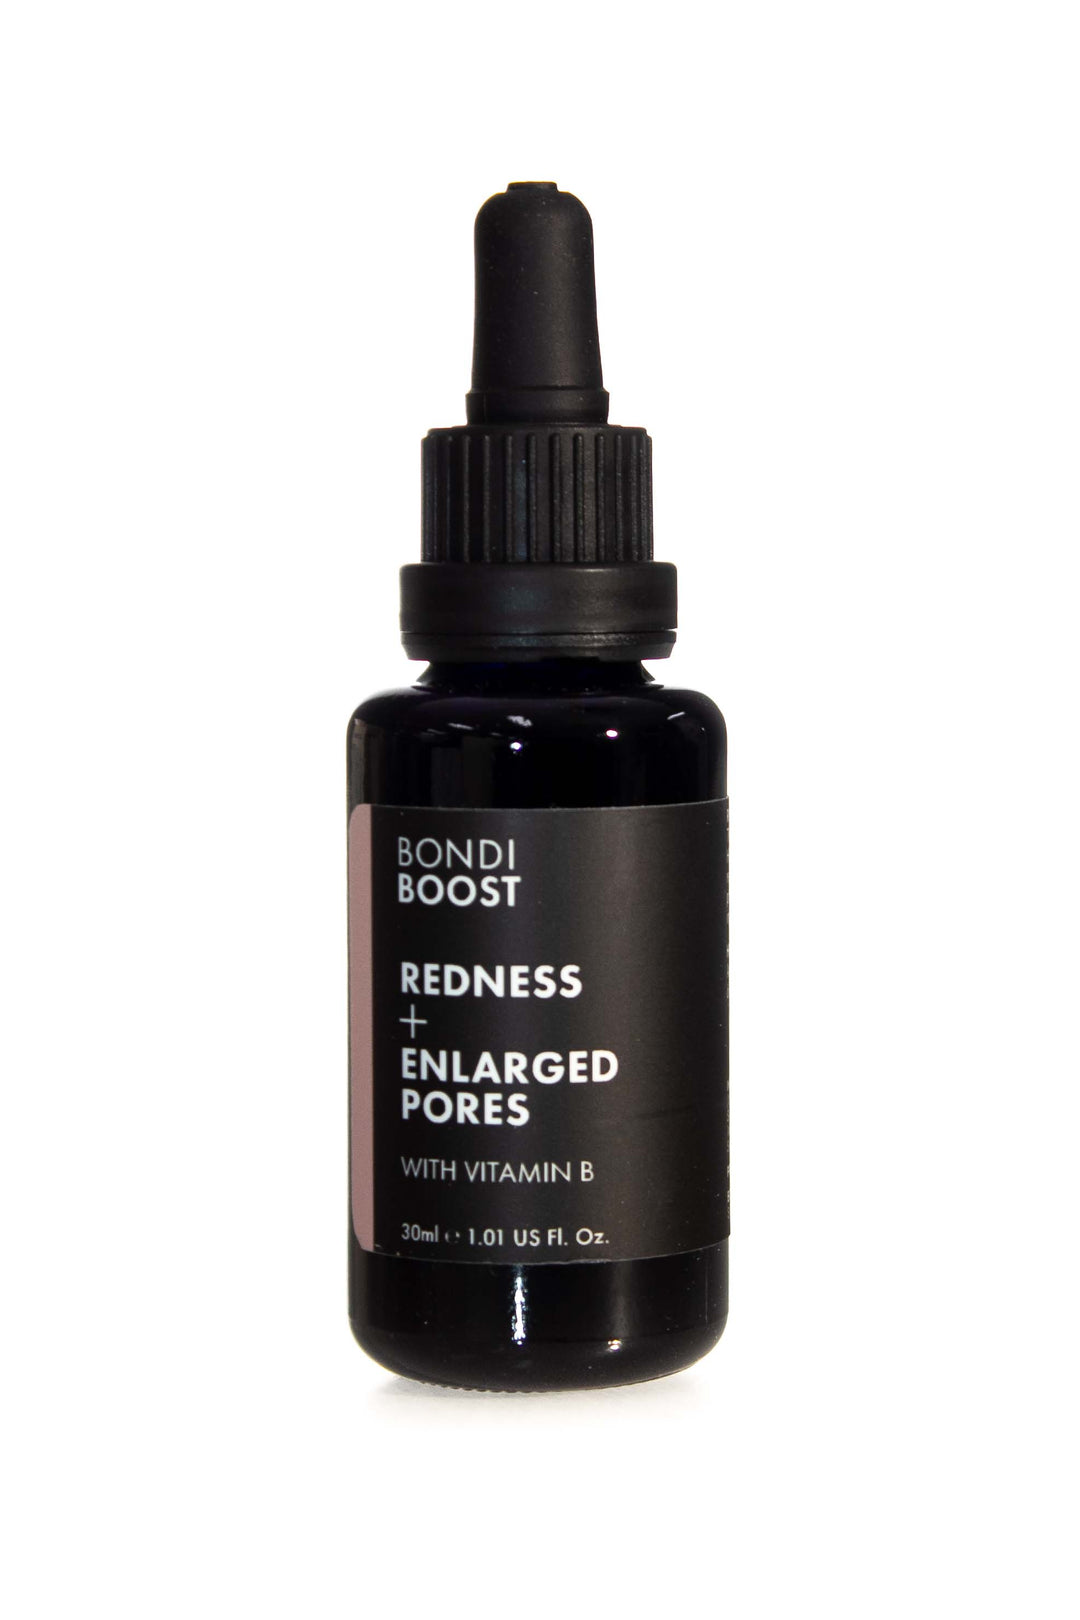 Bondi Boost Super Serum for Redness and Enlarged Pores